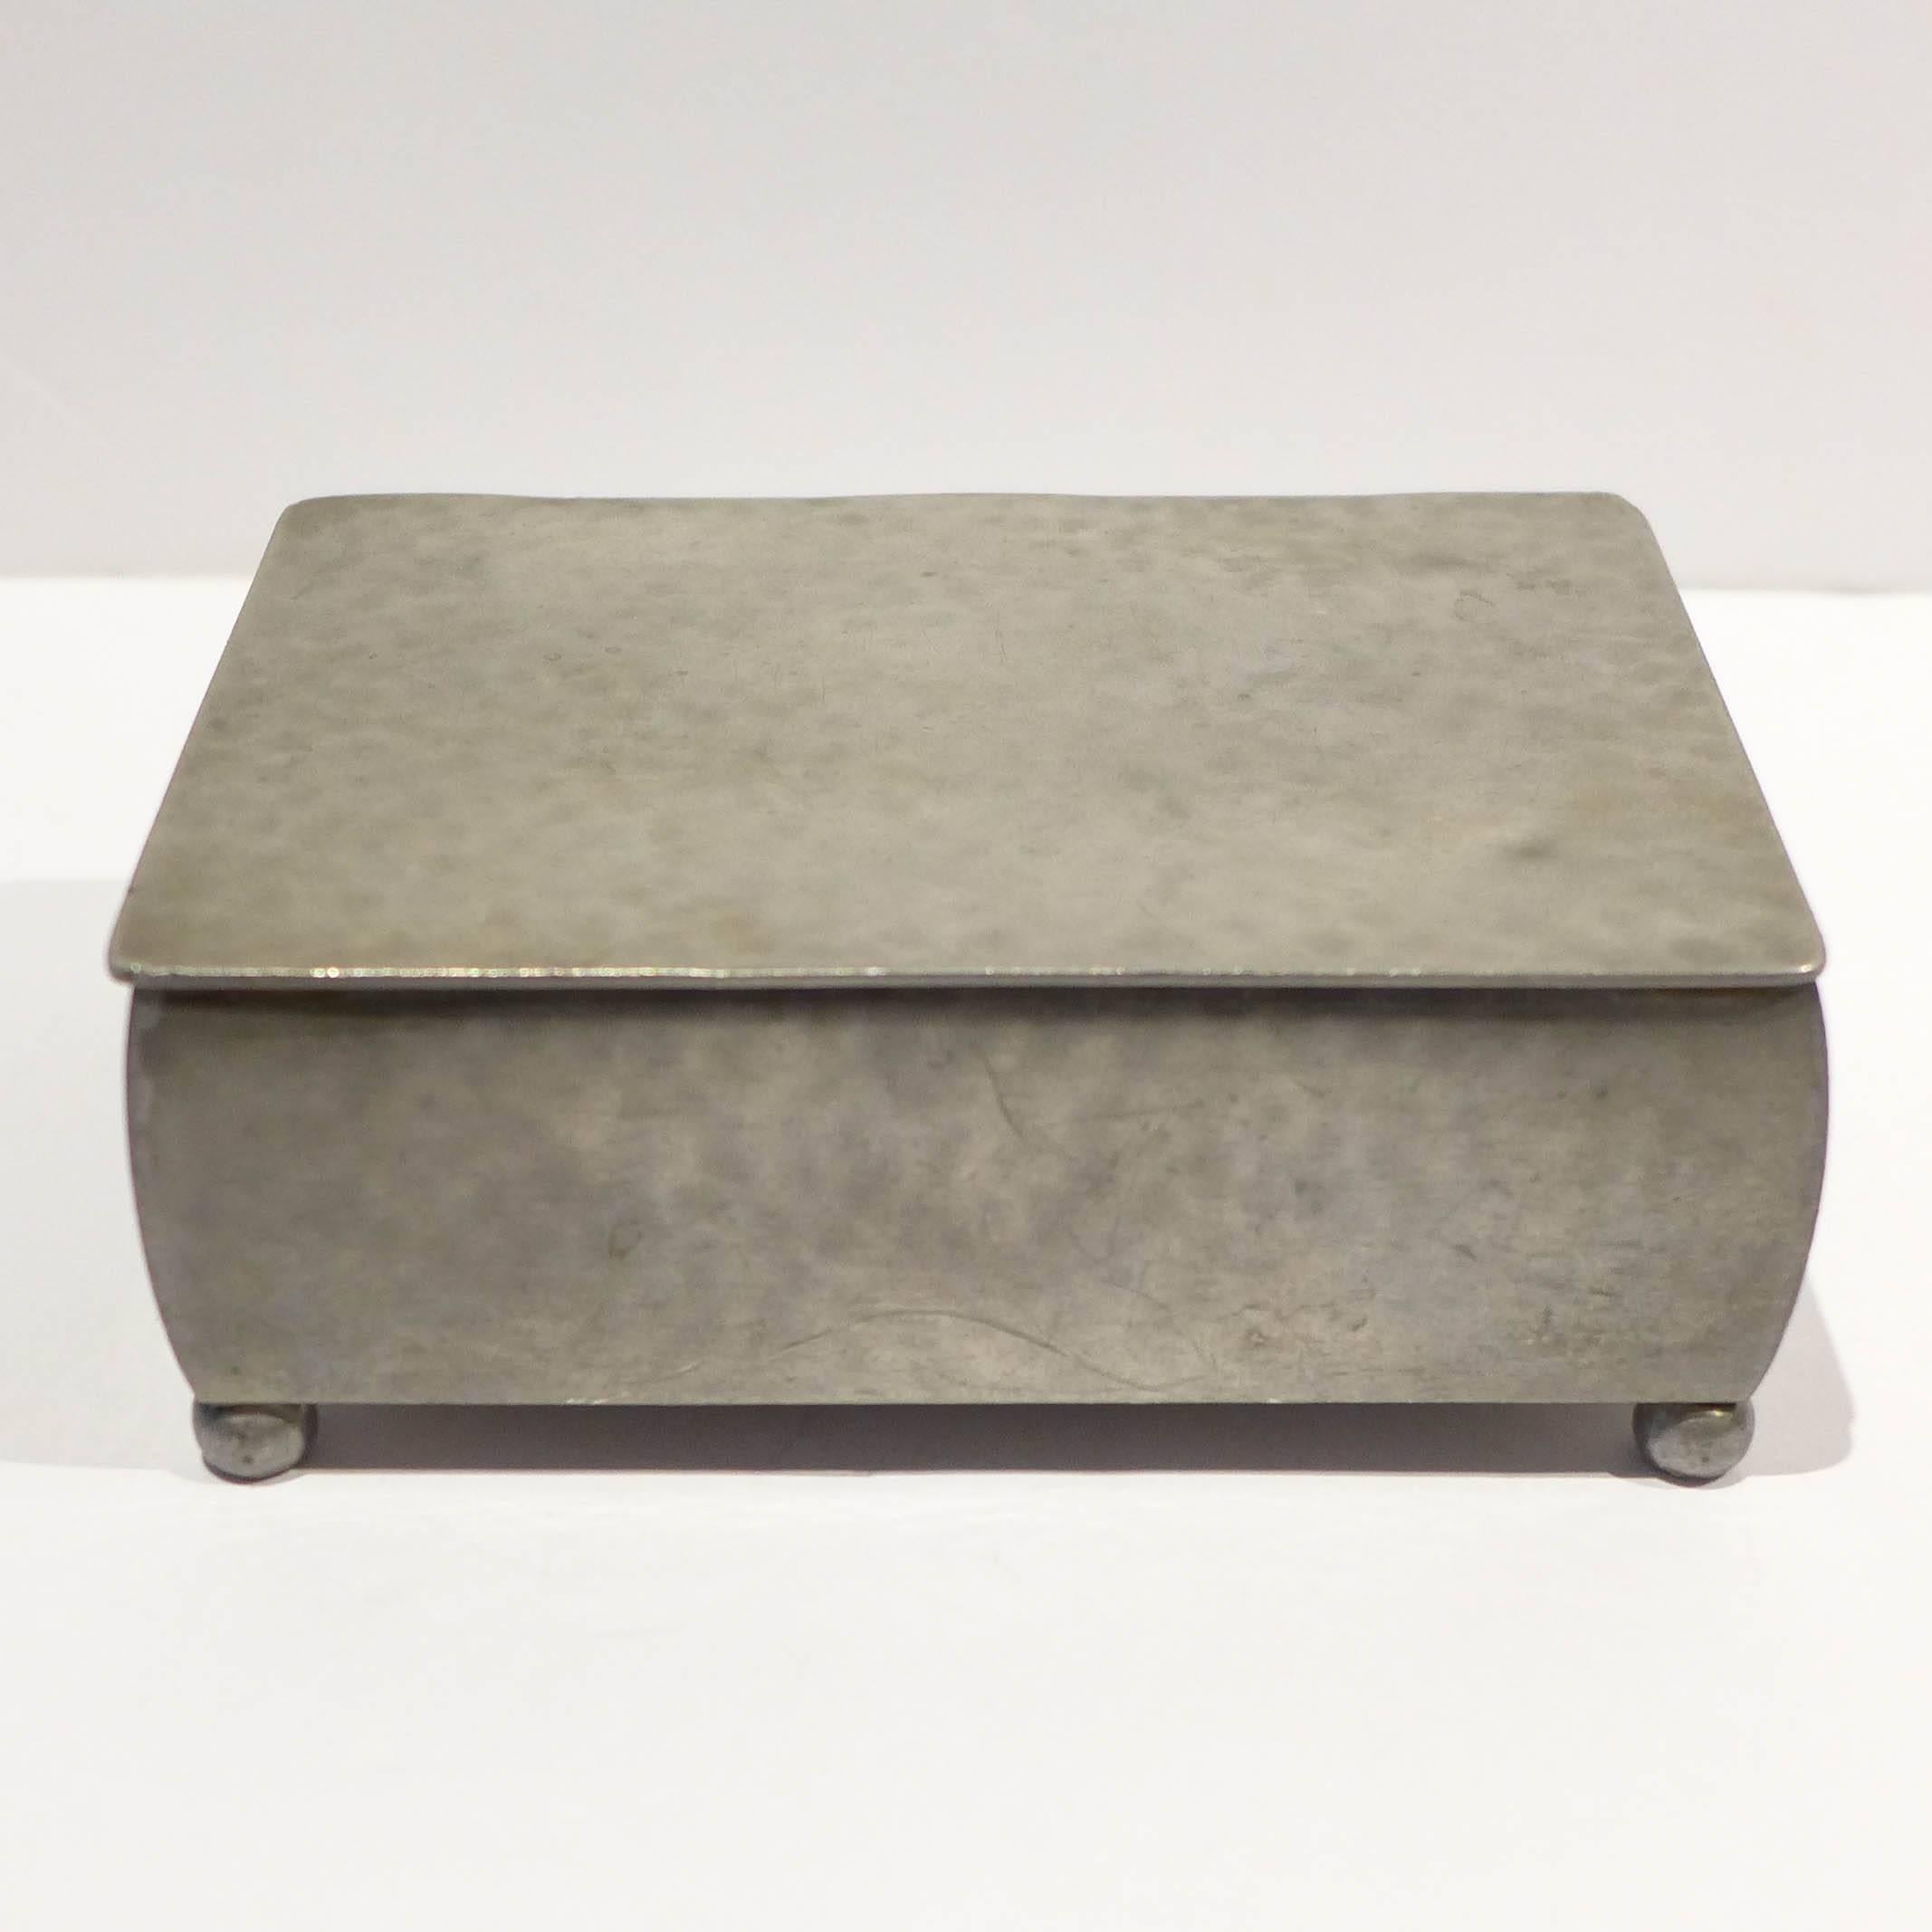 Hand-forged, footed box of hammered pewter with hinged lid and birchwood lining. A sleek casket form adorned only by the Hammer texturing. Designed by Just Andersen for his own company. An early work by this Danish master. Full marks on bottom,